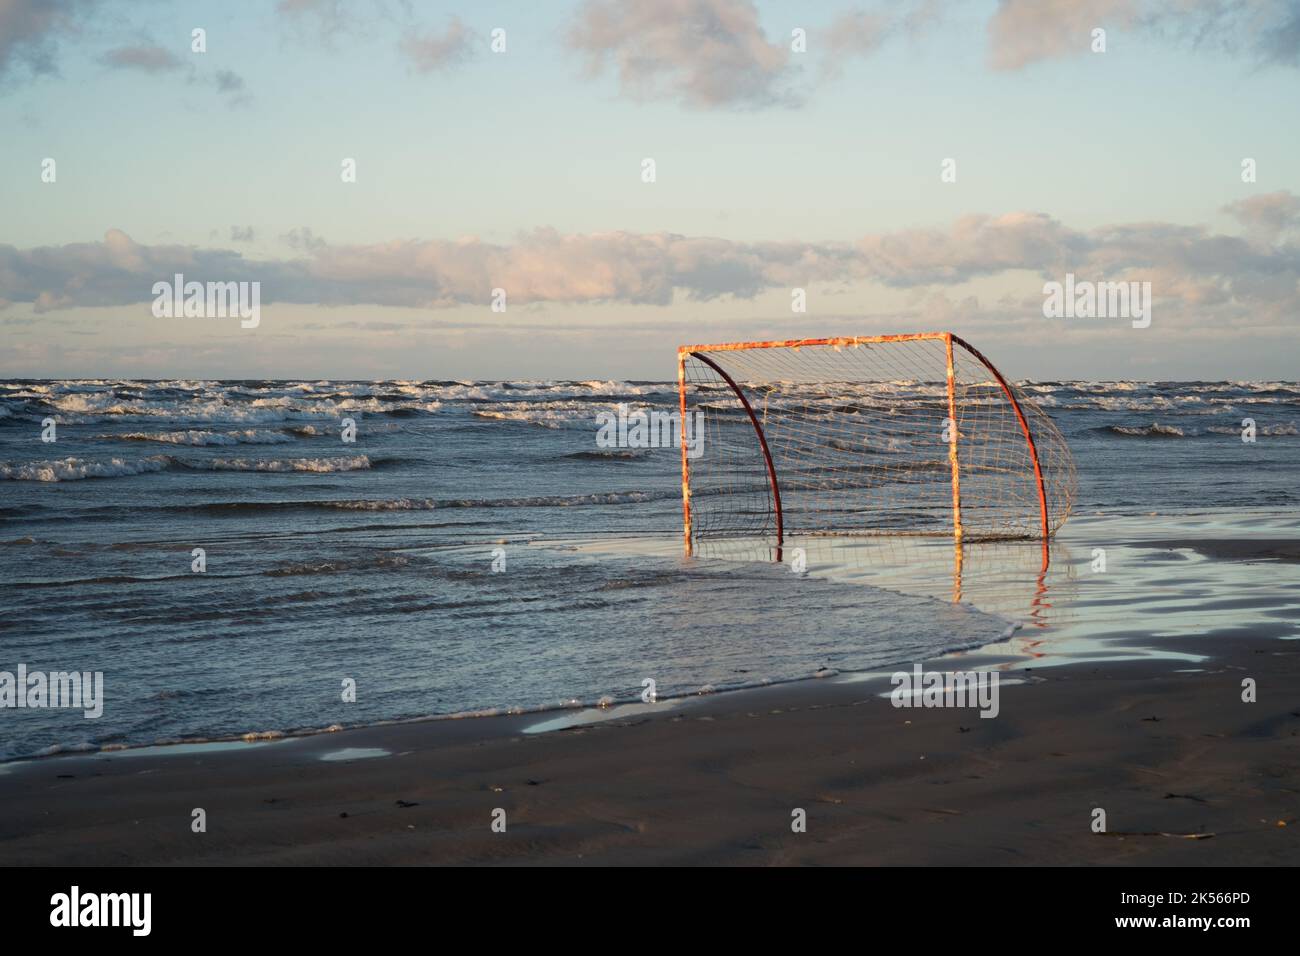 Advancing waves surround a beach football soccer goal in warm sunset light on baltic sea coast Stock Photo